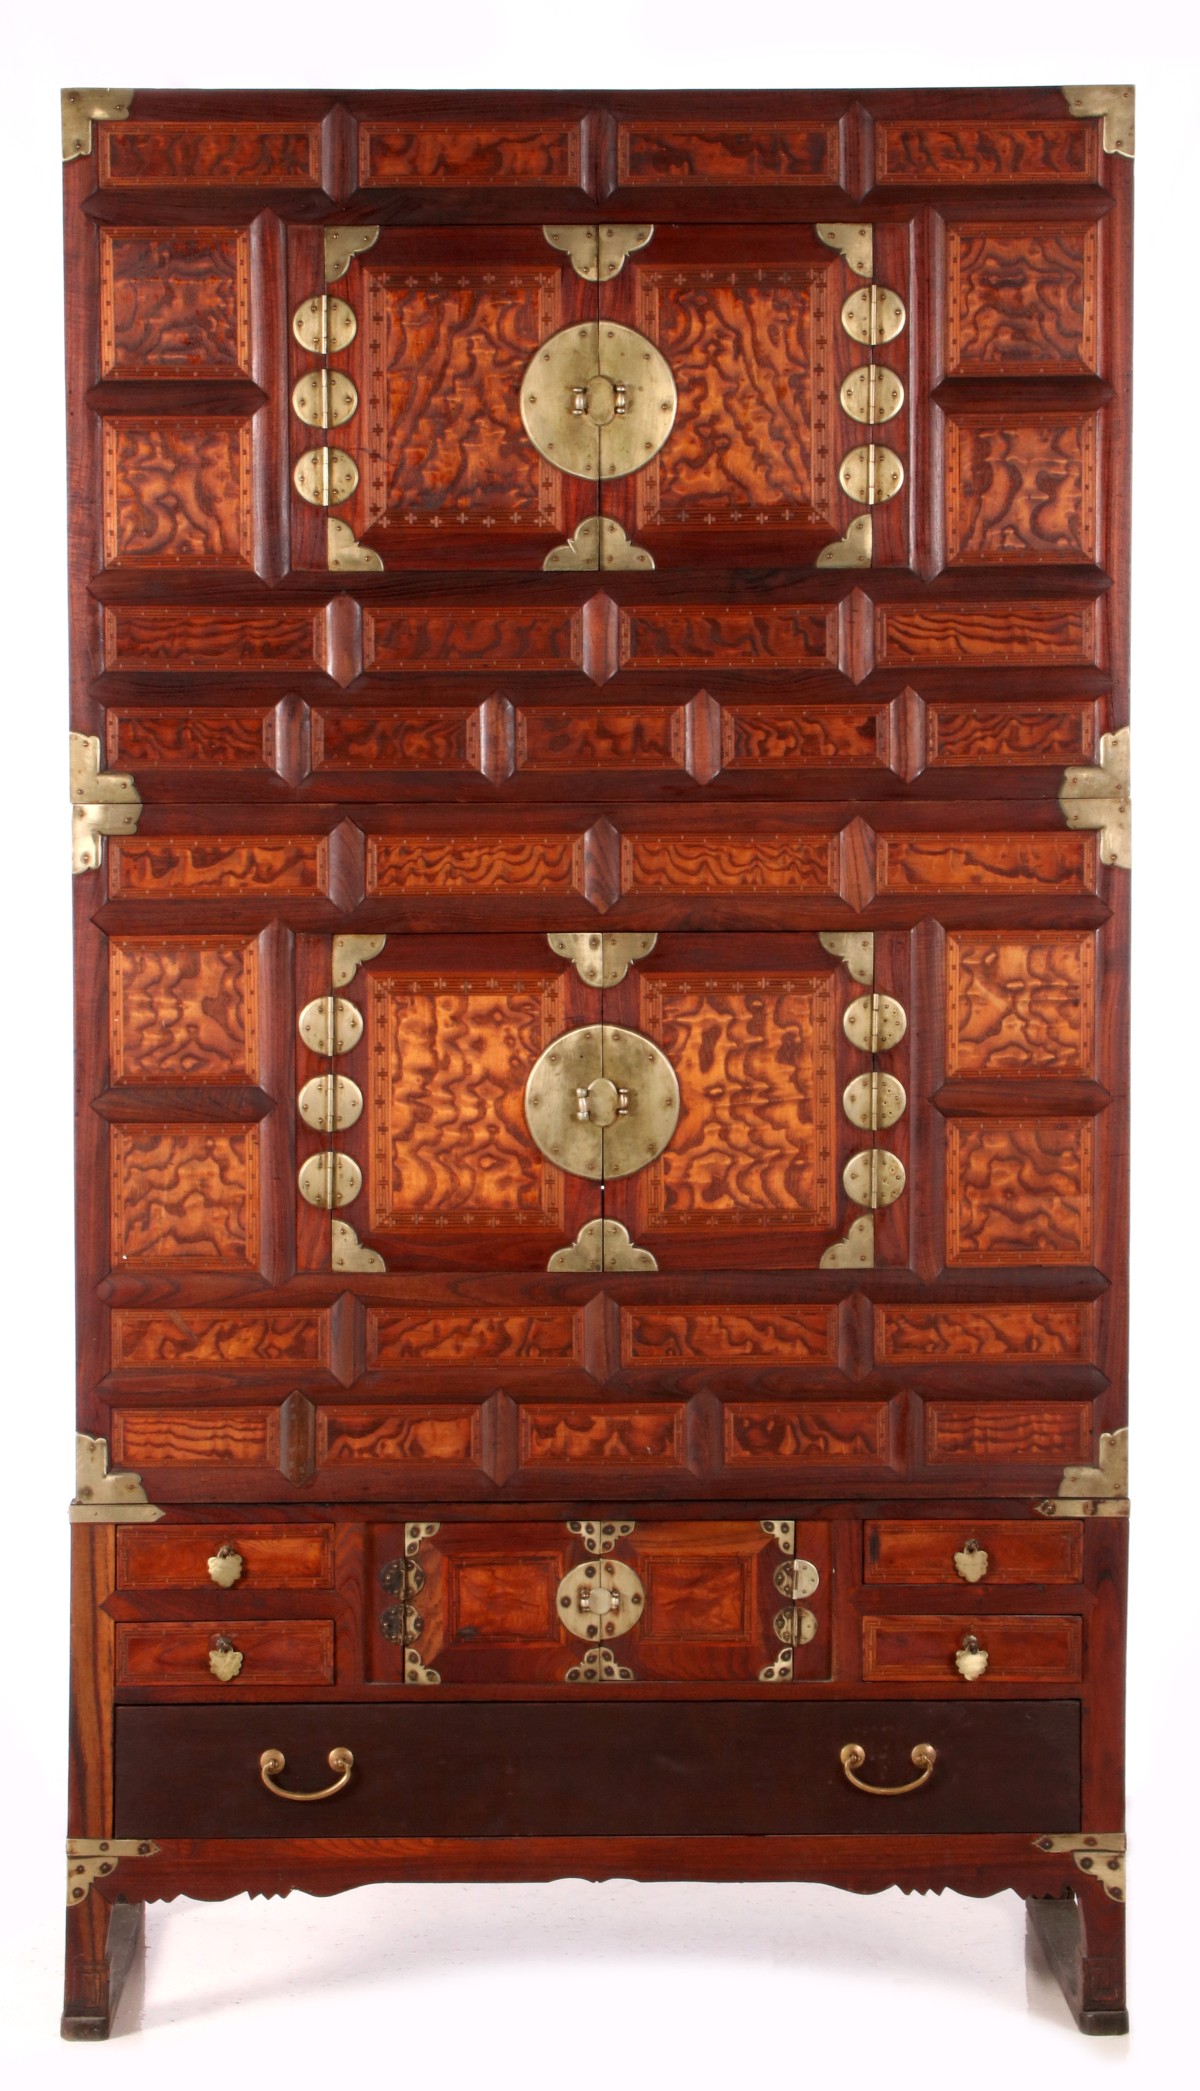 A 19TH CENTURY KOREAN TANSU WITH MARQUETRY DESIGNS